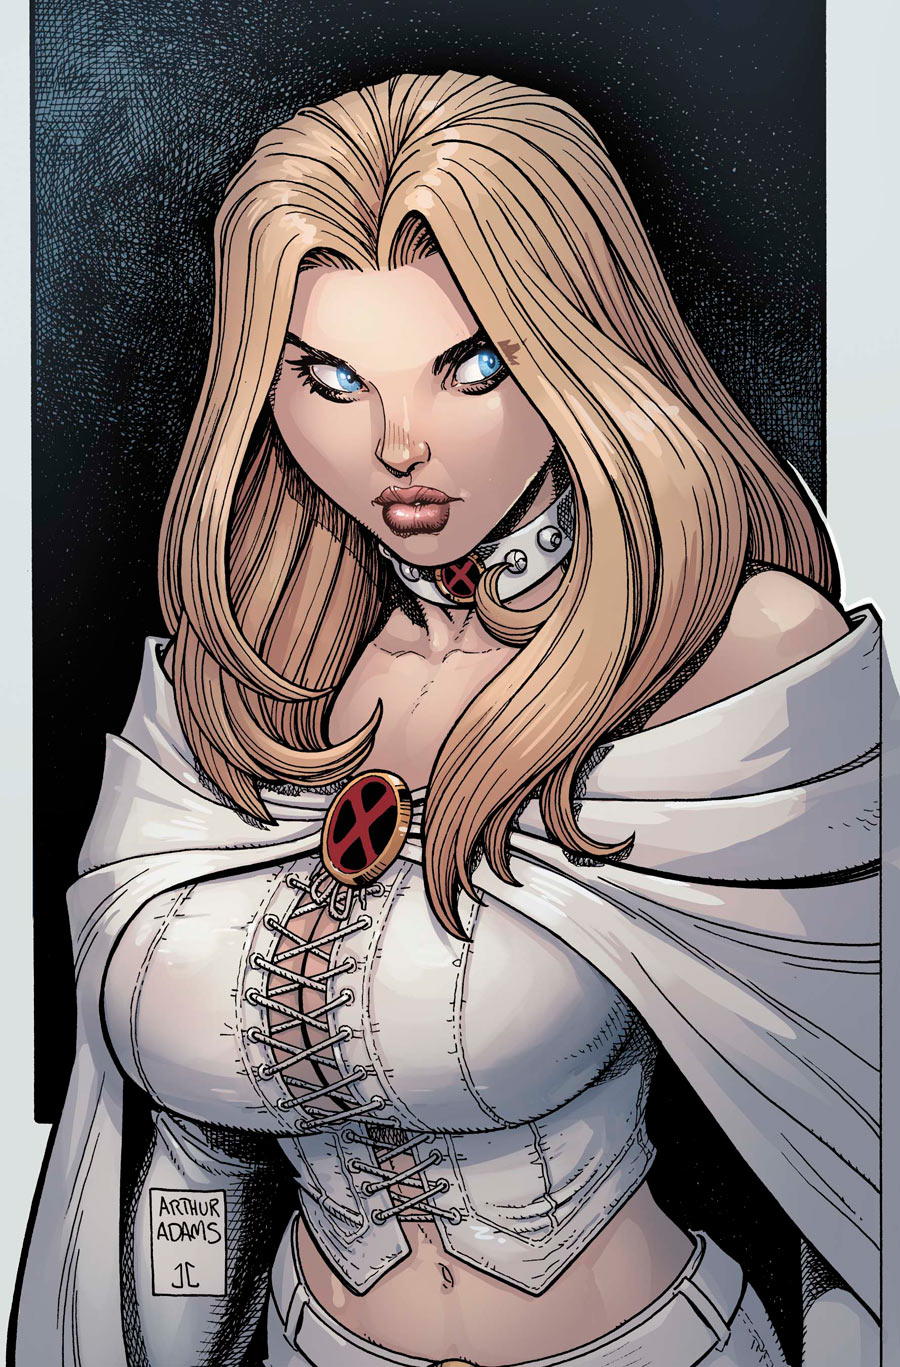 The slut of the Marvel universe. This is one of her least revealing outfits.